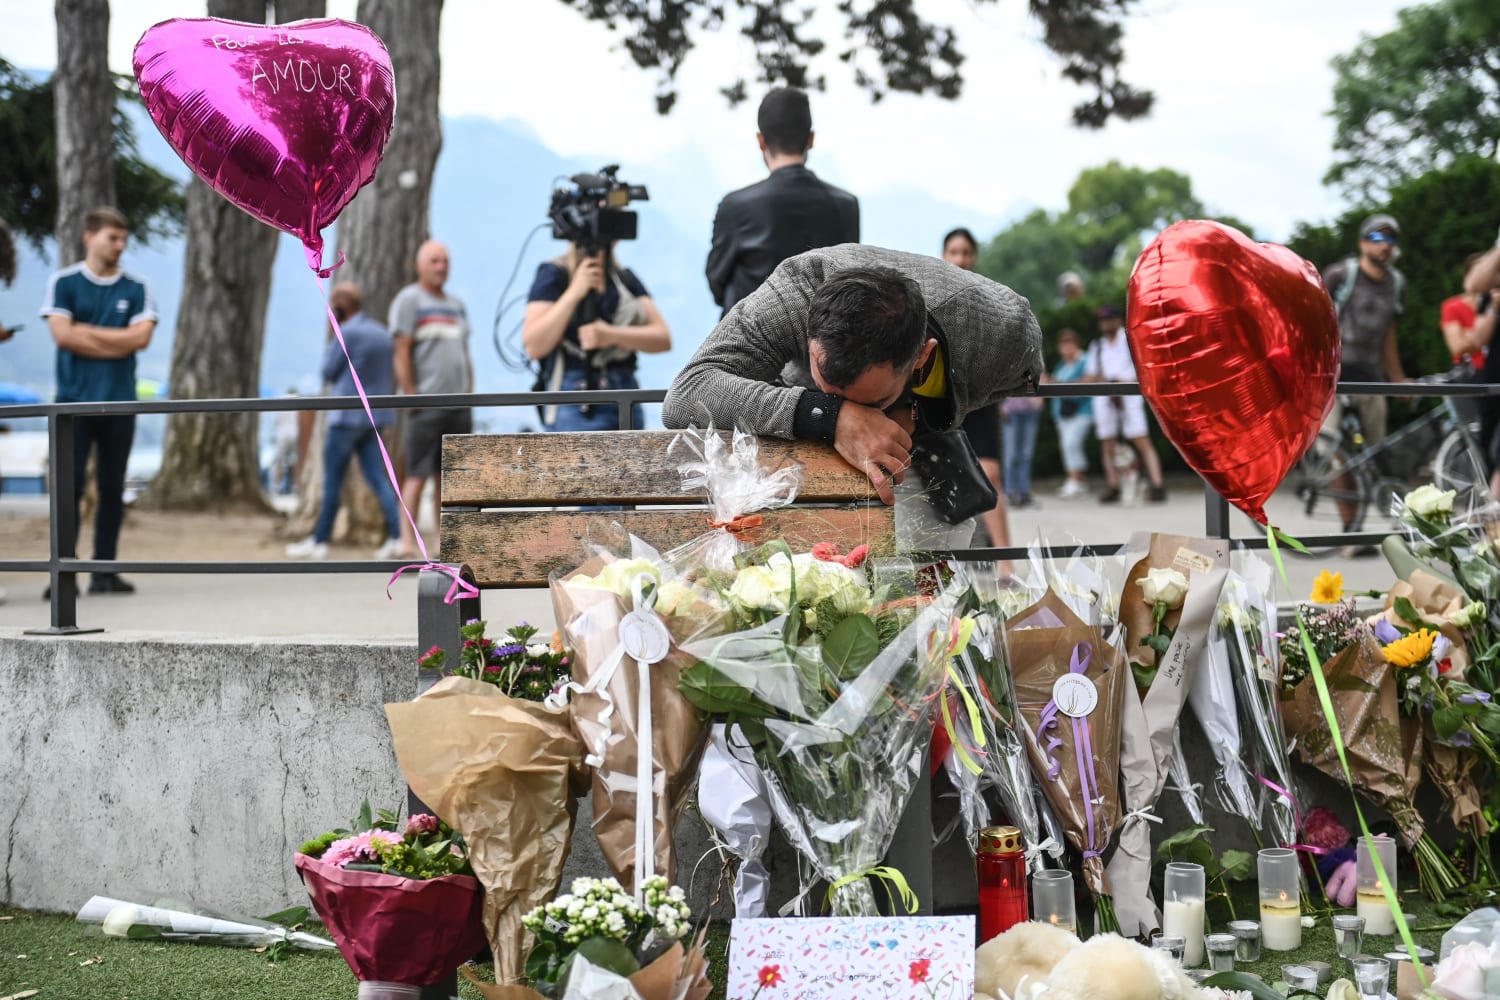 Injured toddlers remain hospitalized as French stabbing suspect charged with attempted murder